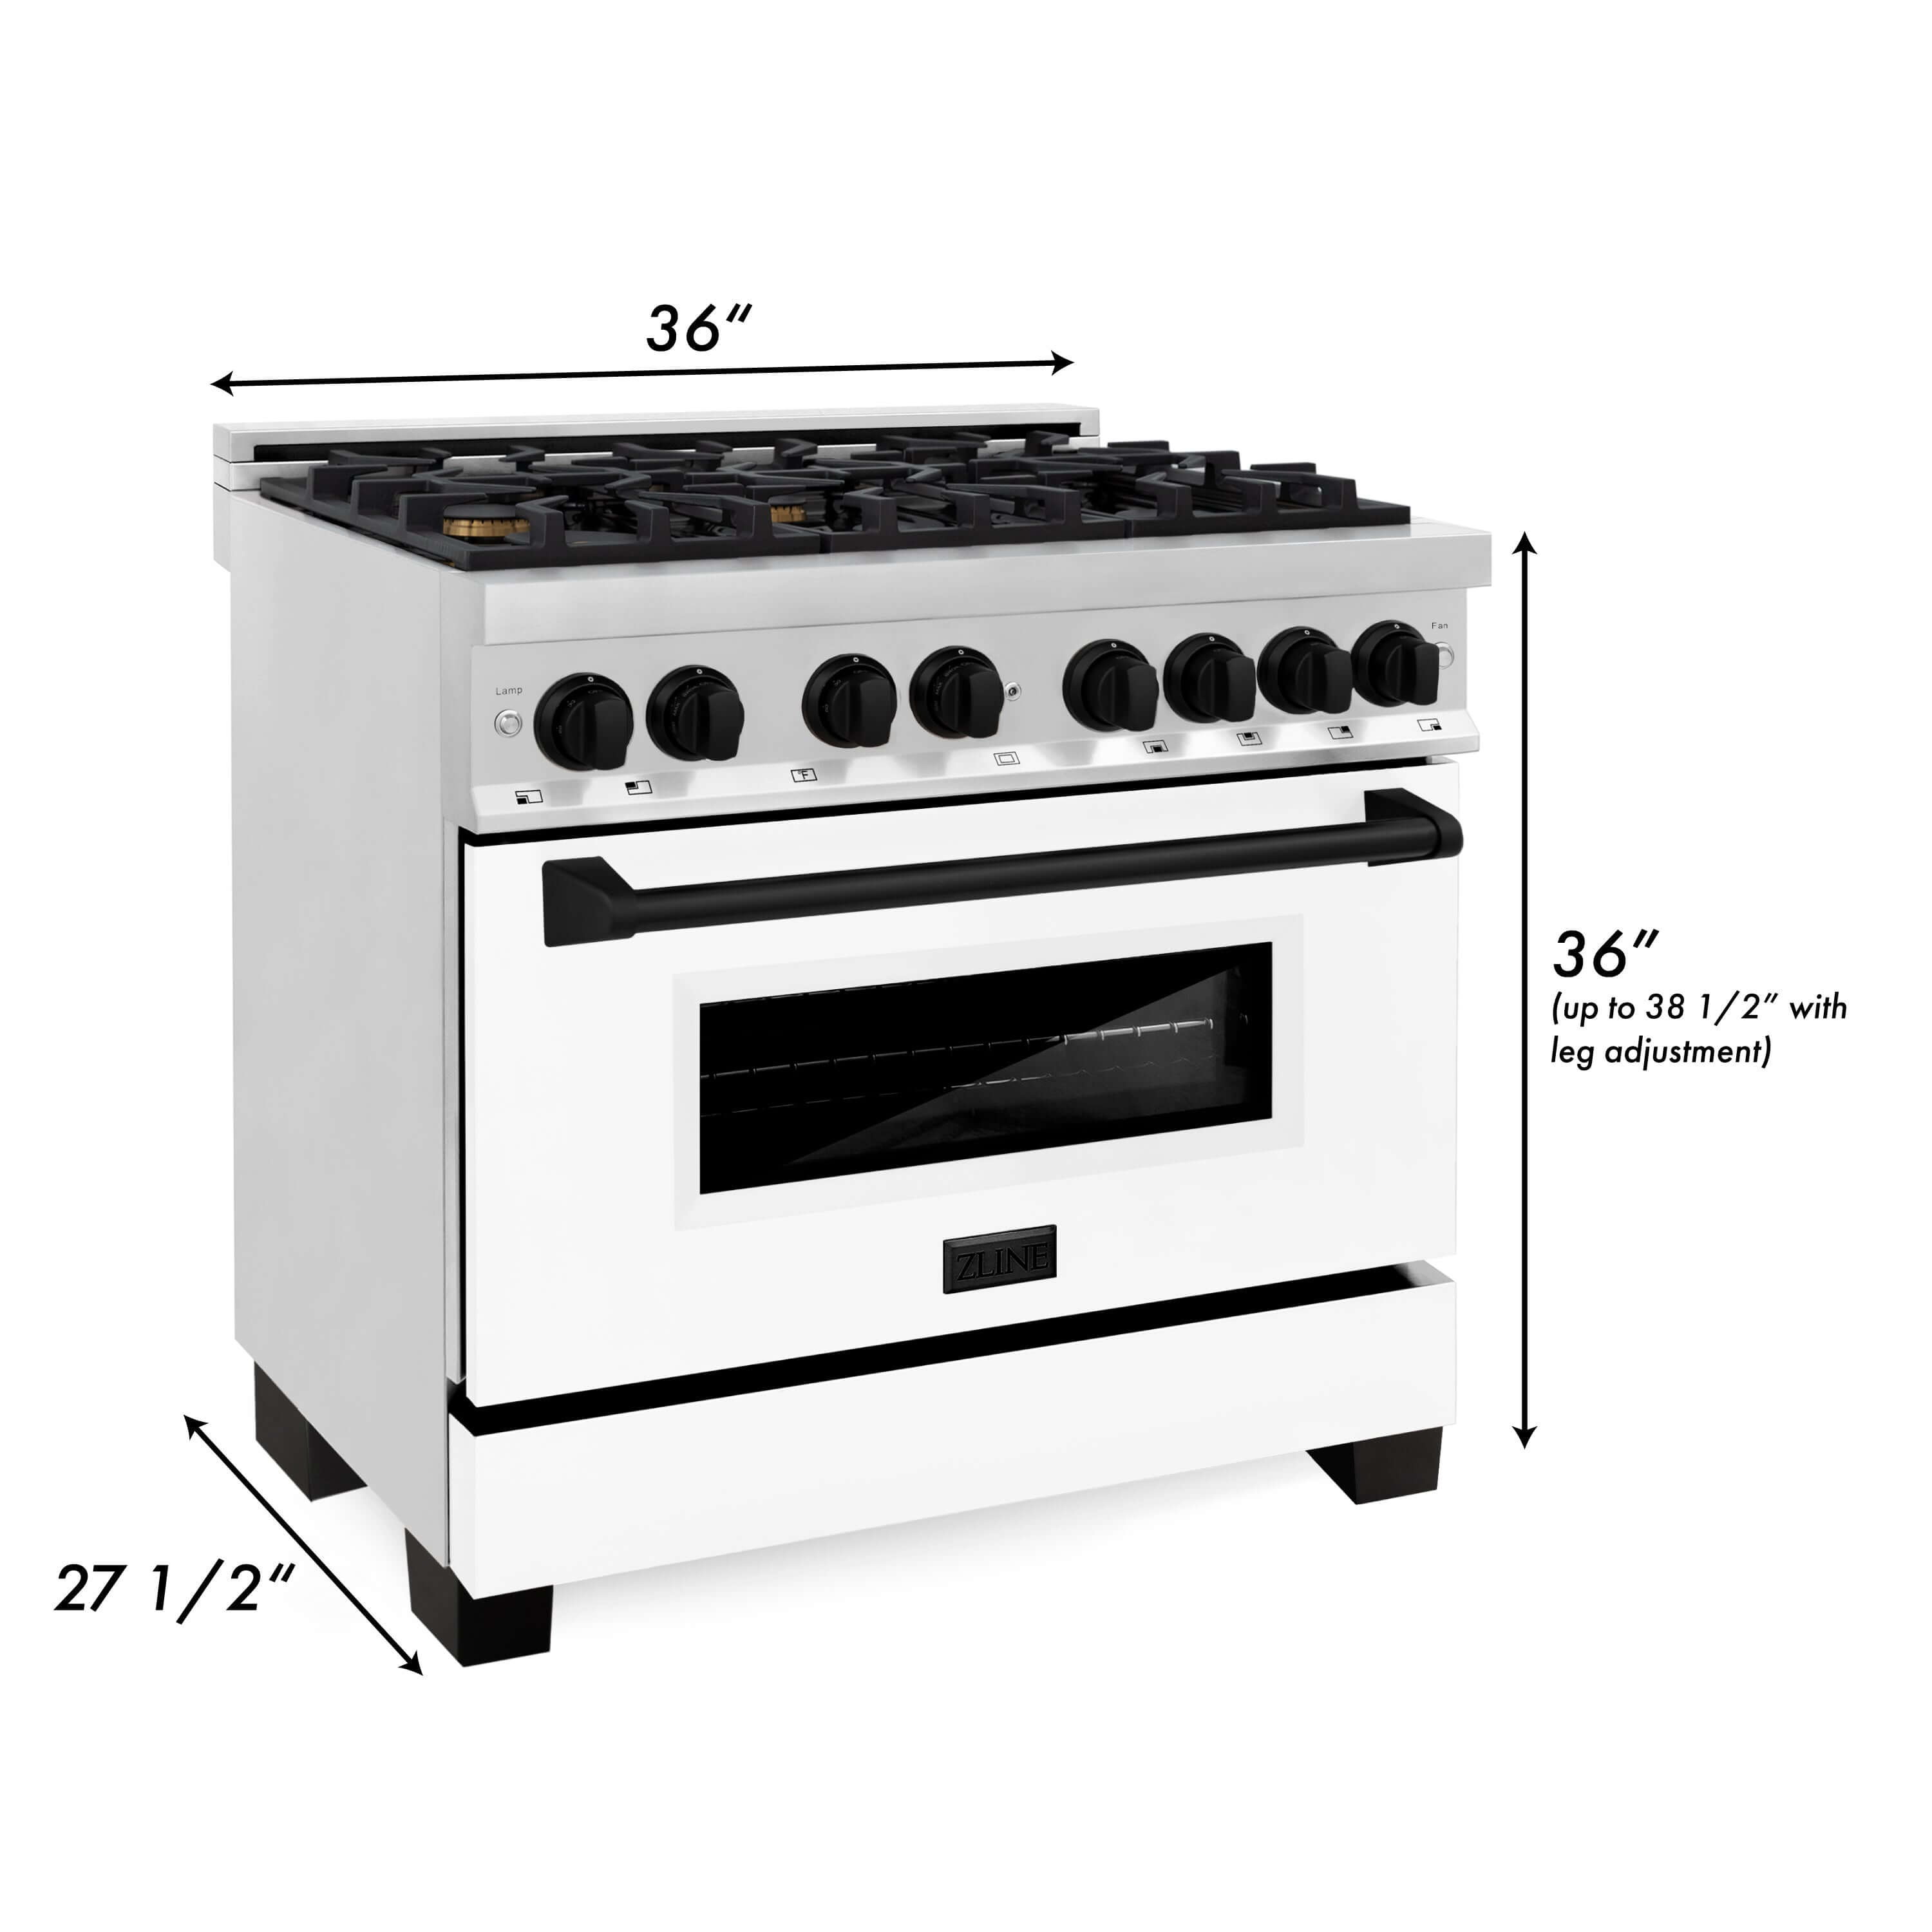 ZLINE Autograph Edition 36 in. Kitchen Package with Stainless Steel Dual Fuel Range with White Matte Door, Range Hood and Dishwasher with Matte Black Accents (3AKP-RAWMRHDWM36-MB) dimensional diagram with measurements.